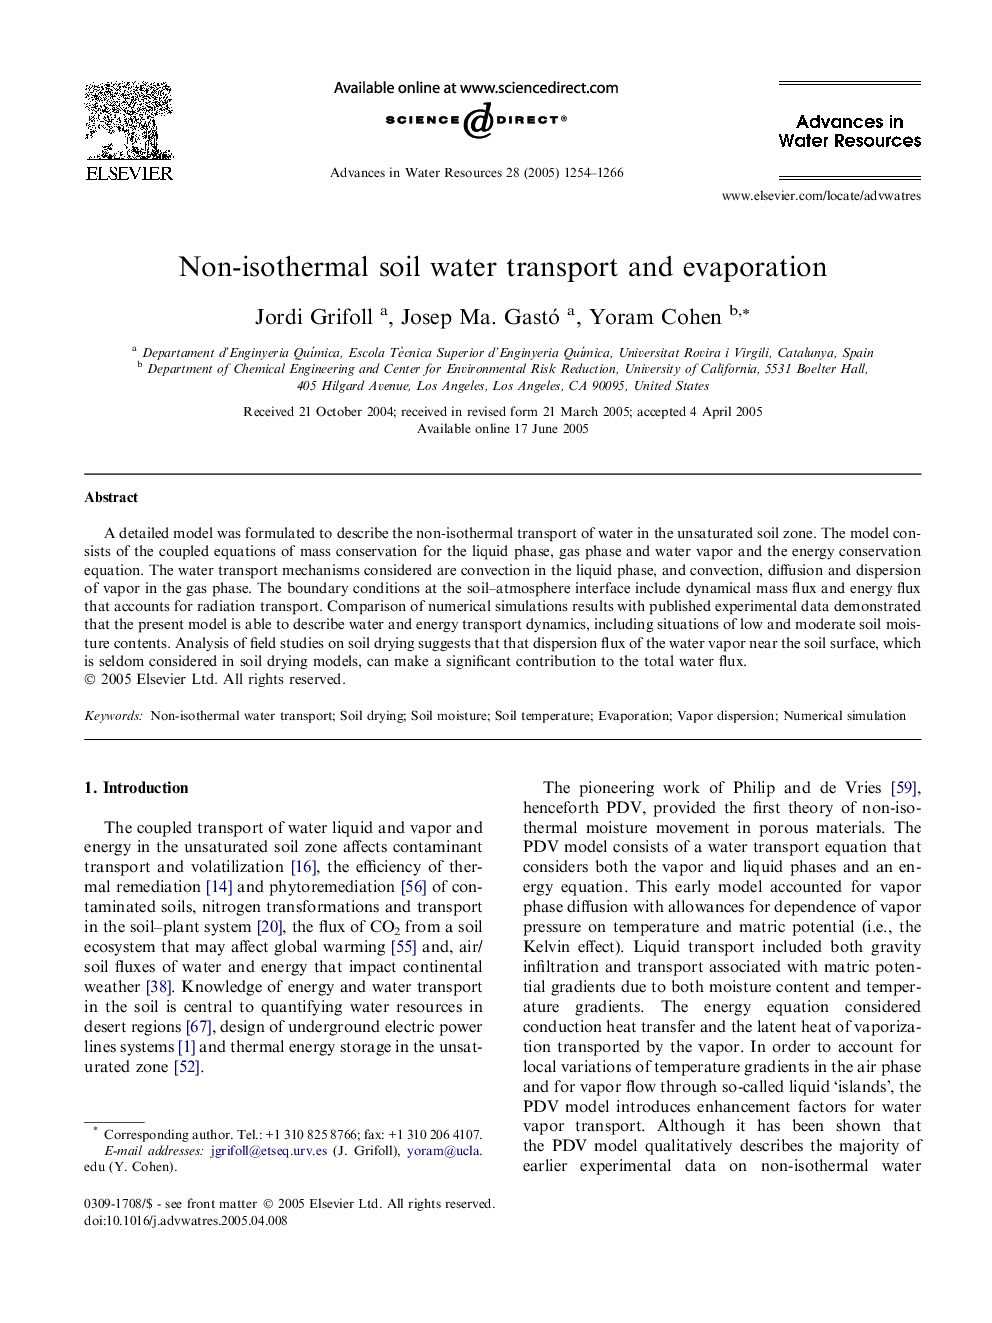 Non-isothermal soil water transport and evaporation